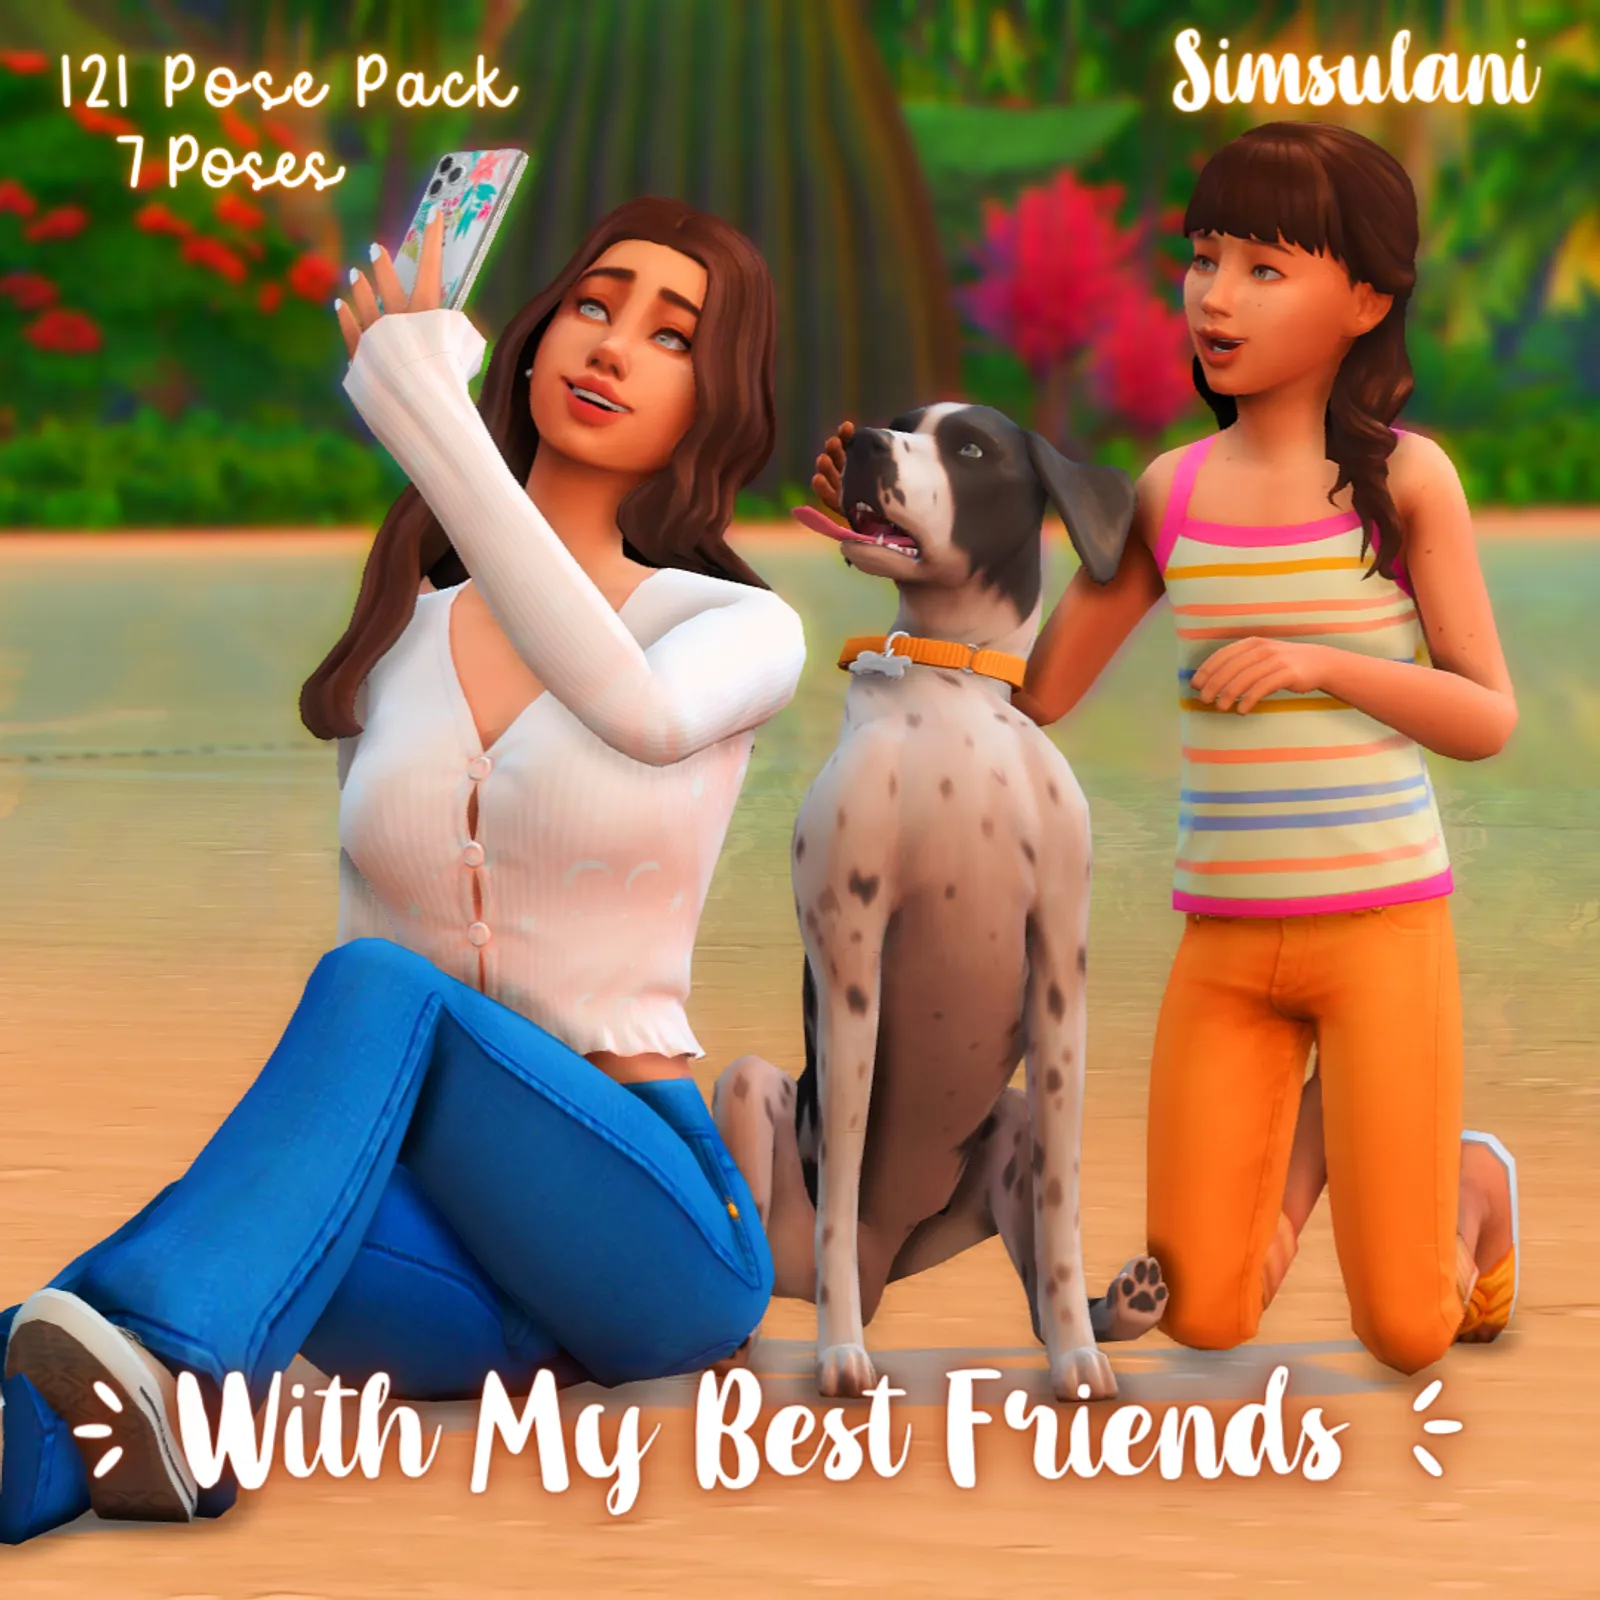 #121 Pose Pack "With my bestfriends" ?